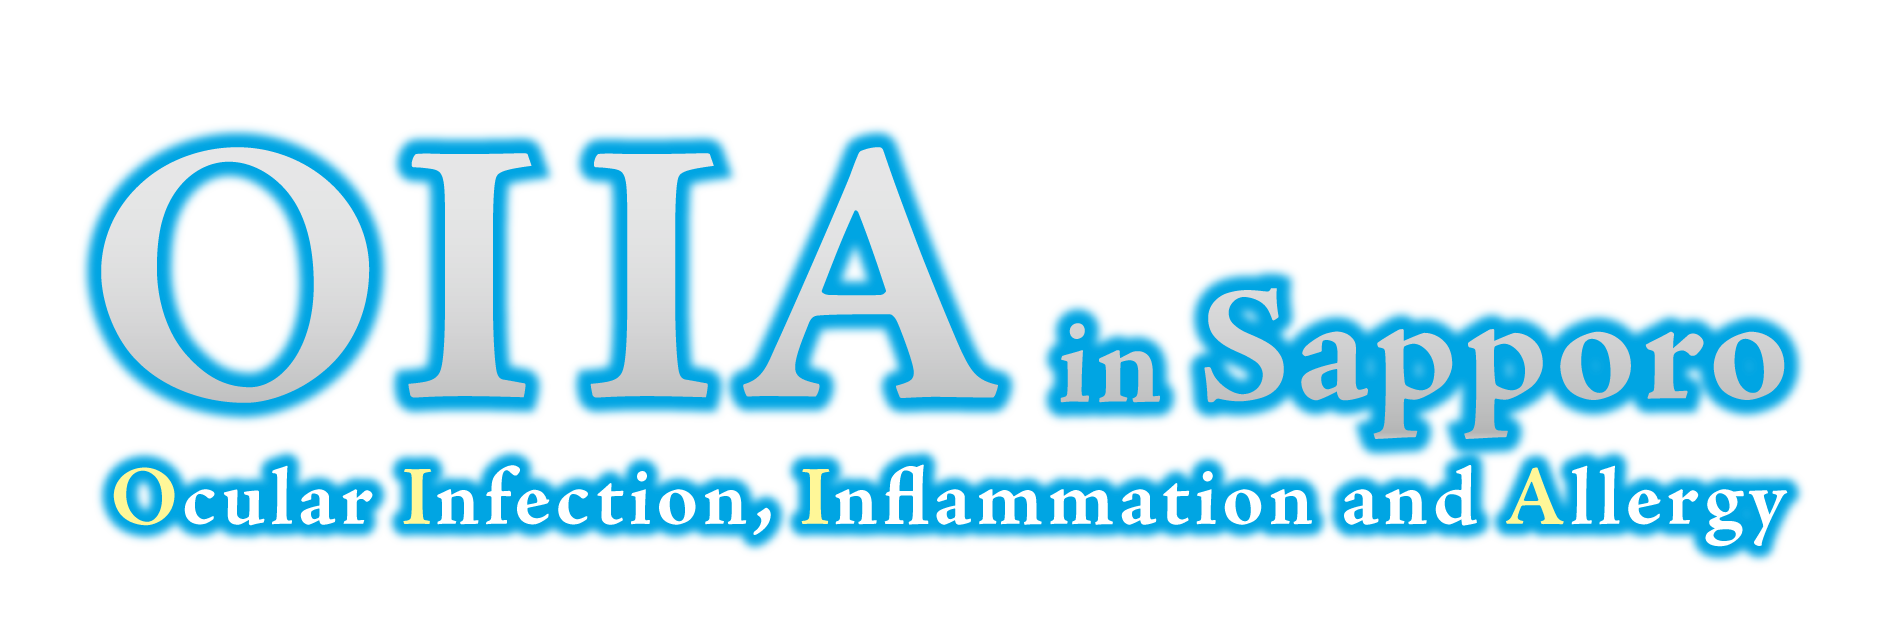 OIIA in Sapporo Ocular Infection, Inflammation and Allergy